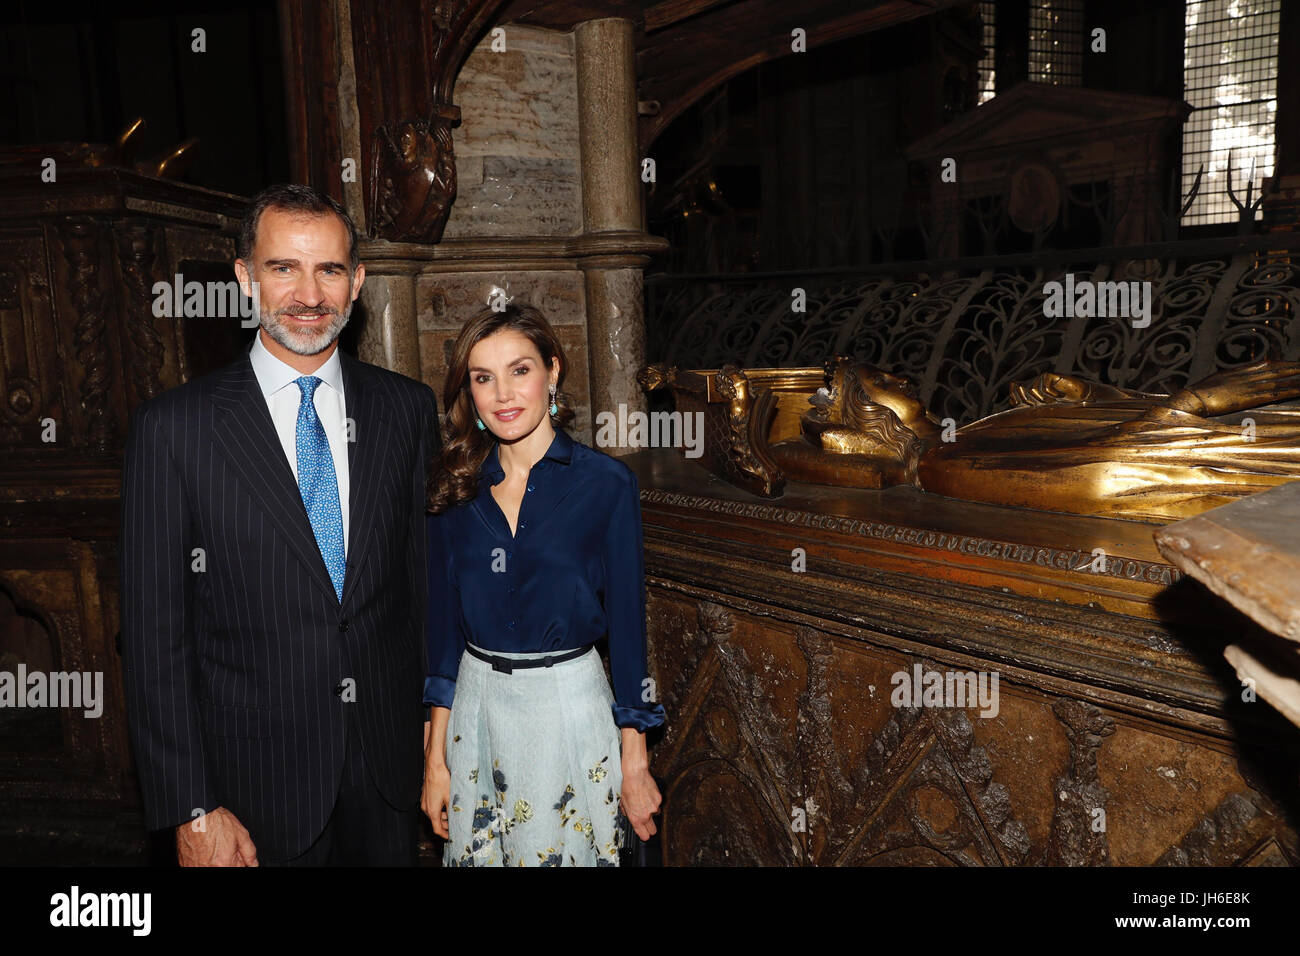 Casa de Su Majestad el Rey issued photo of King Felipe VI and Queen Letizia of Spain, at the tomb of Eleanor of Castile the wife of Edward I, King of England from 1272 to 1307 during their tour of Westminster Abbey in London, during the King's State Visit to the UK. Stock Photo